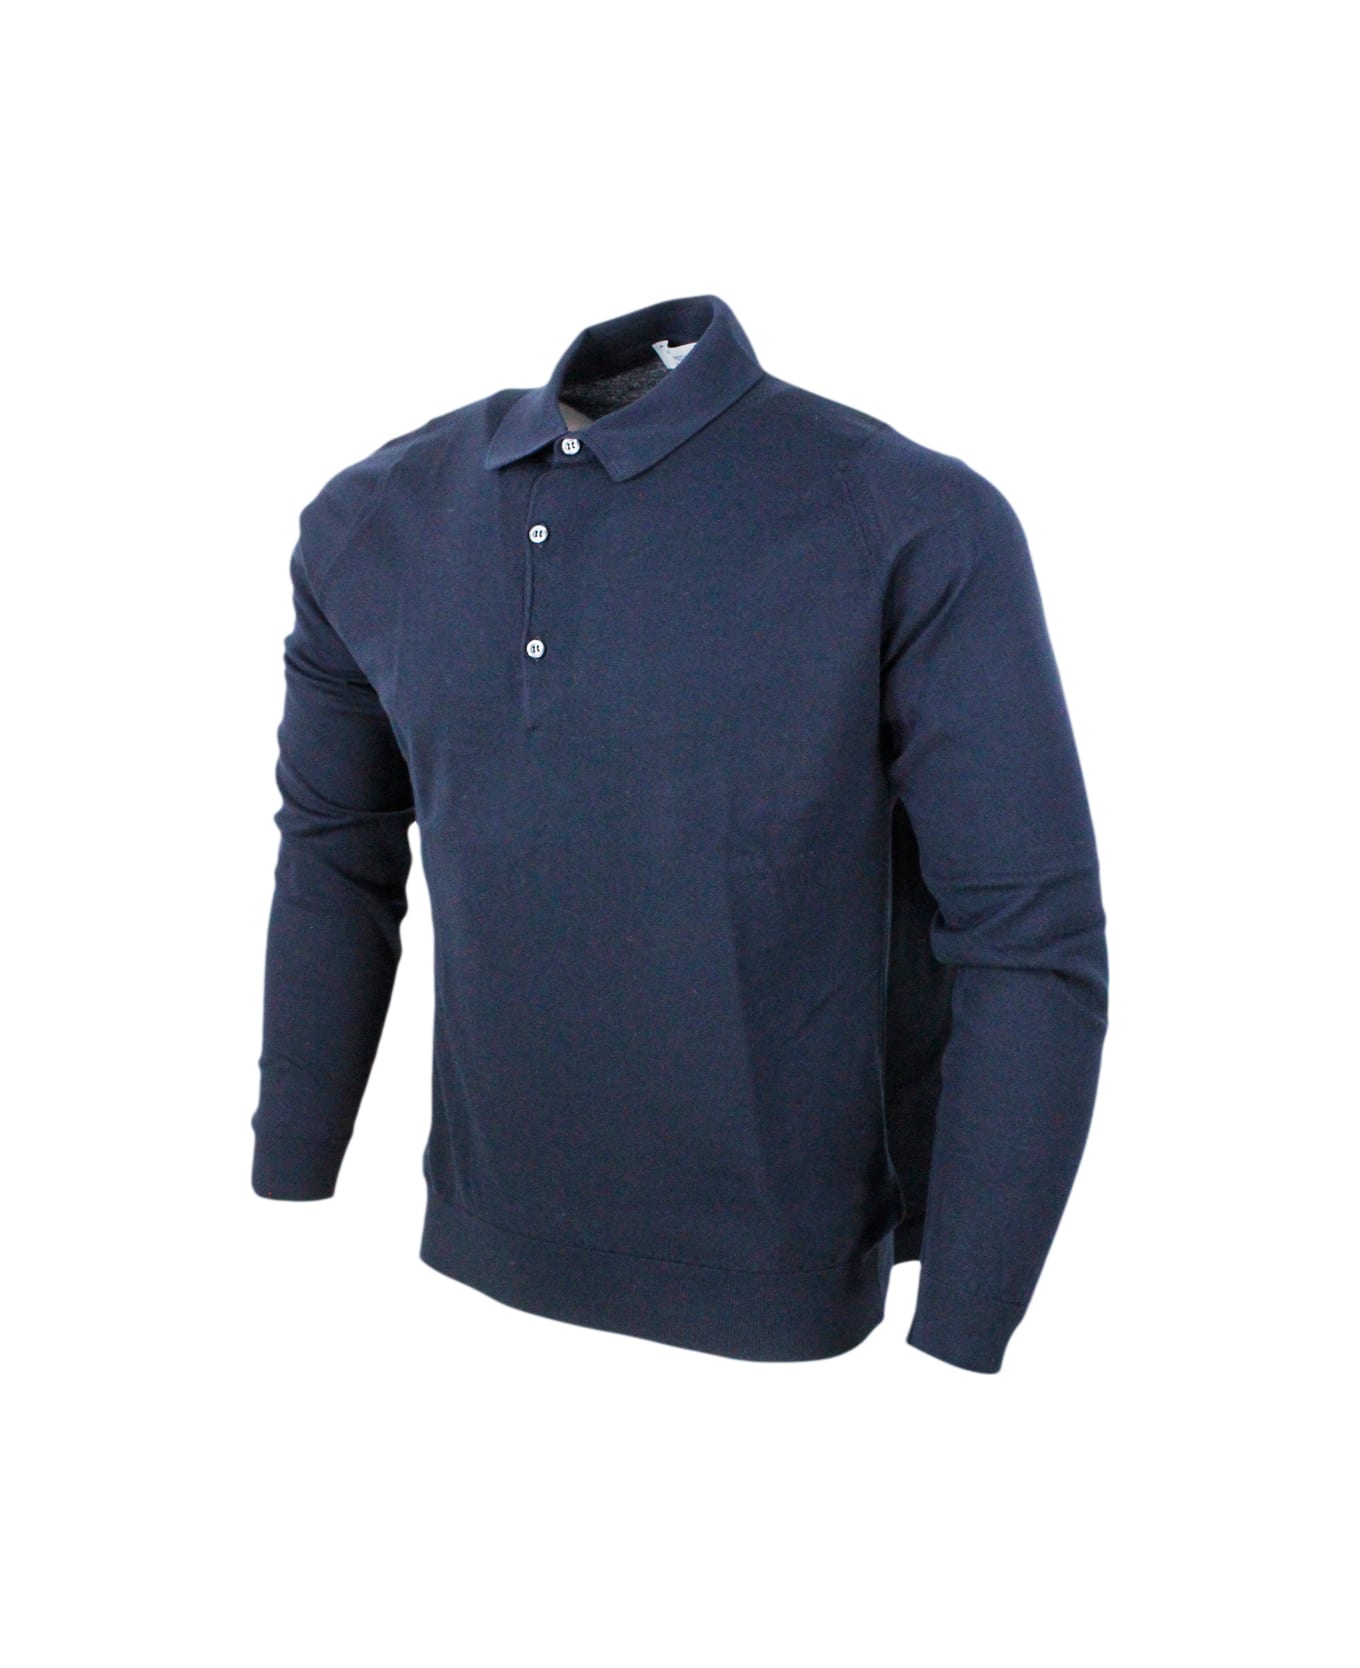 John Smedley Long-sleeved Polo Shirt In Extrafine Cotton Thread With Three Buttons - Blu